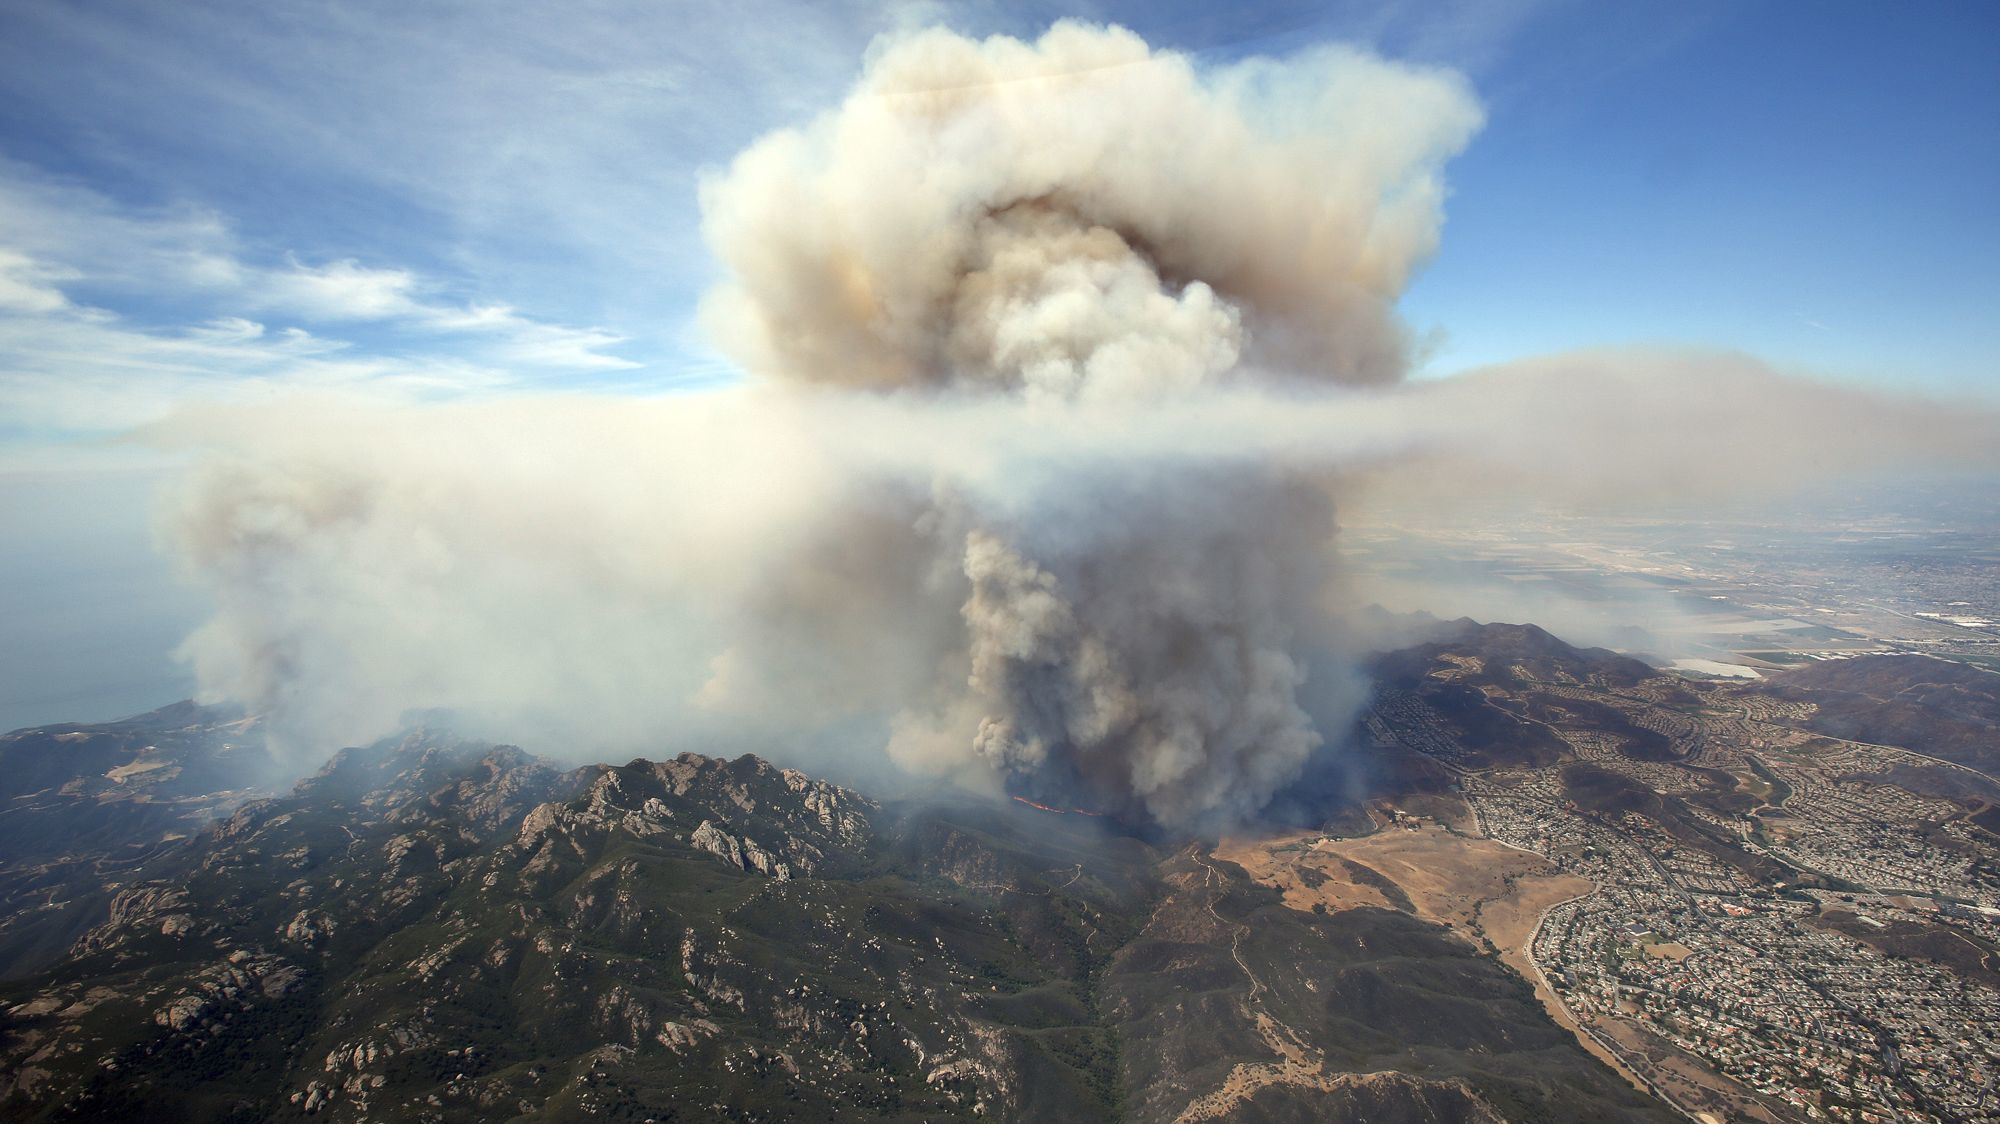 Aerial view of the Springs fire burning in the Santa Monica Mountains between Malibu and Newbury Park in 2013.